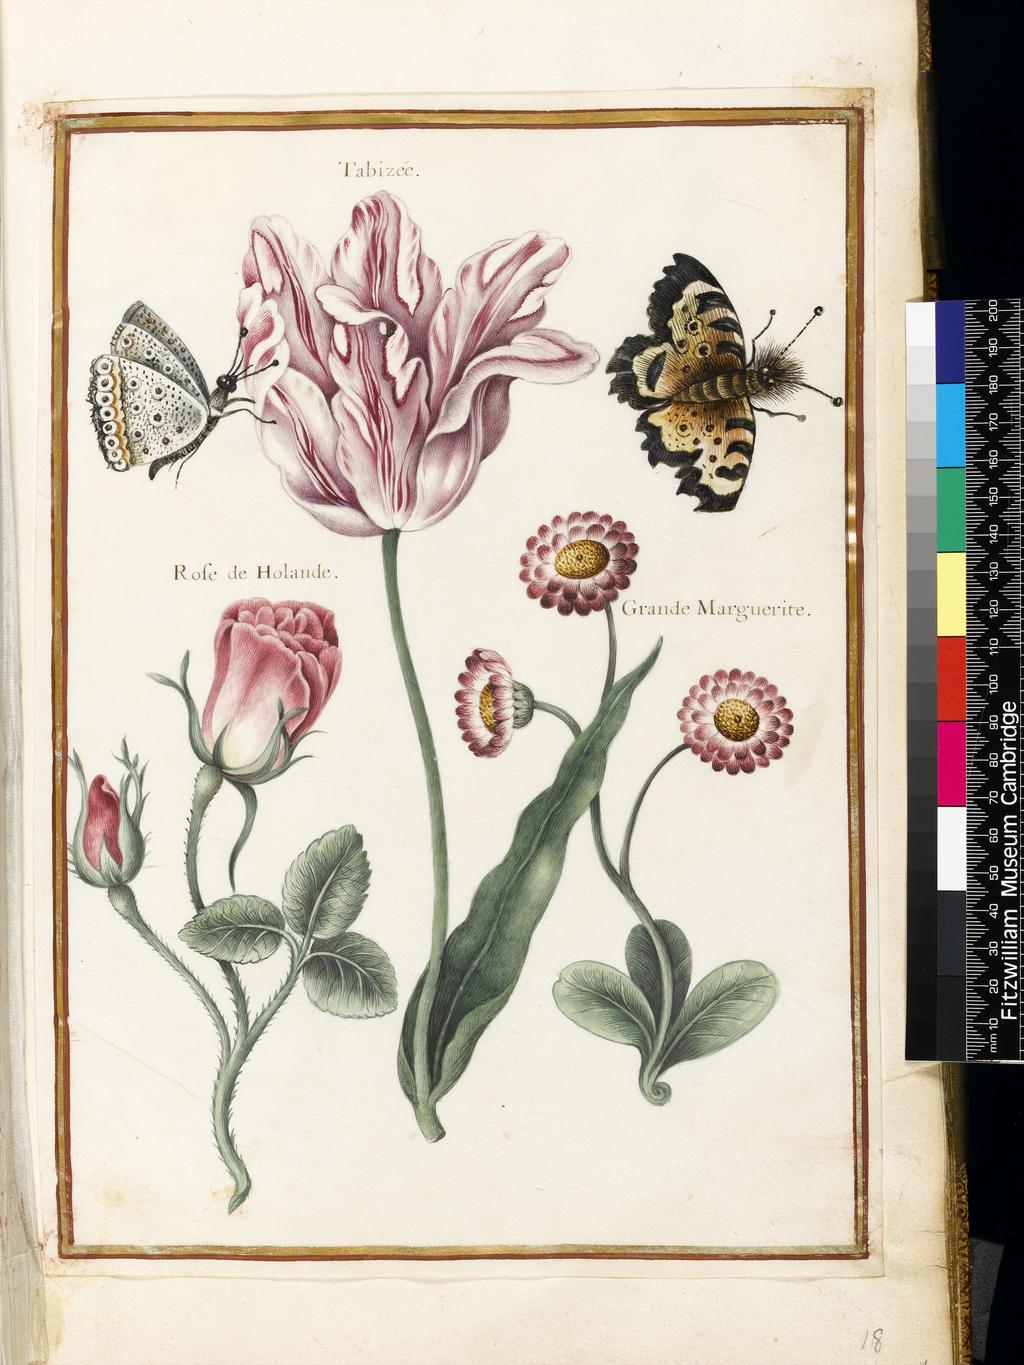 An image of A 'broken' Tulip (Tabizée), Rose of Holland and large daisy and two unidentified butterflies. Robert, Nicolas attributed to (French, 1614-1685). Graphite, Indian ink, watercolour and bodycolour on vellum, height 318 mm, width 225 mm. Album containing 62 botanical drawings on vellum tipped in on the gilt-edged pages of the album which bear the watermark of an 18th century French paper-maker, Malmenayde of Thiers (active from 1731). Bound in red morocco with clasps, the spine tooled in gilt. The Pages are interleaved with thin protective paper. Ruled lines of red and gold border the drawings on all sides. 17th Century. French.